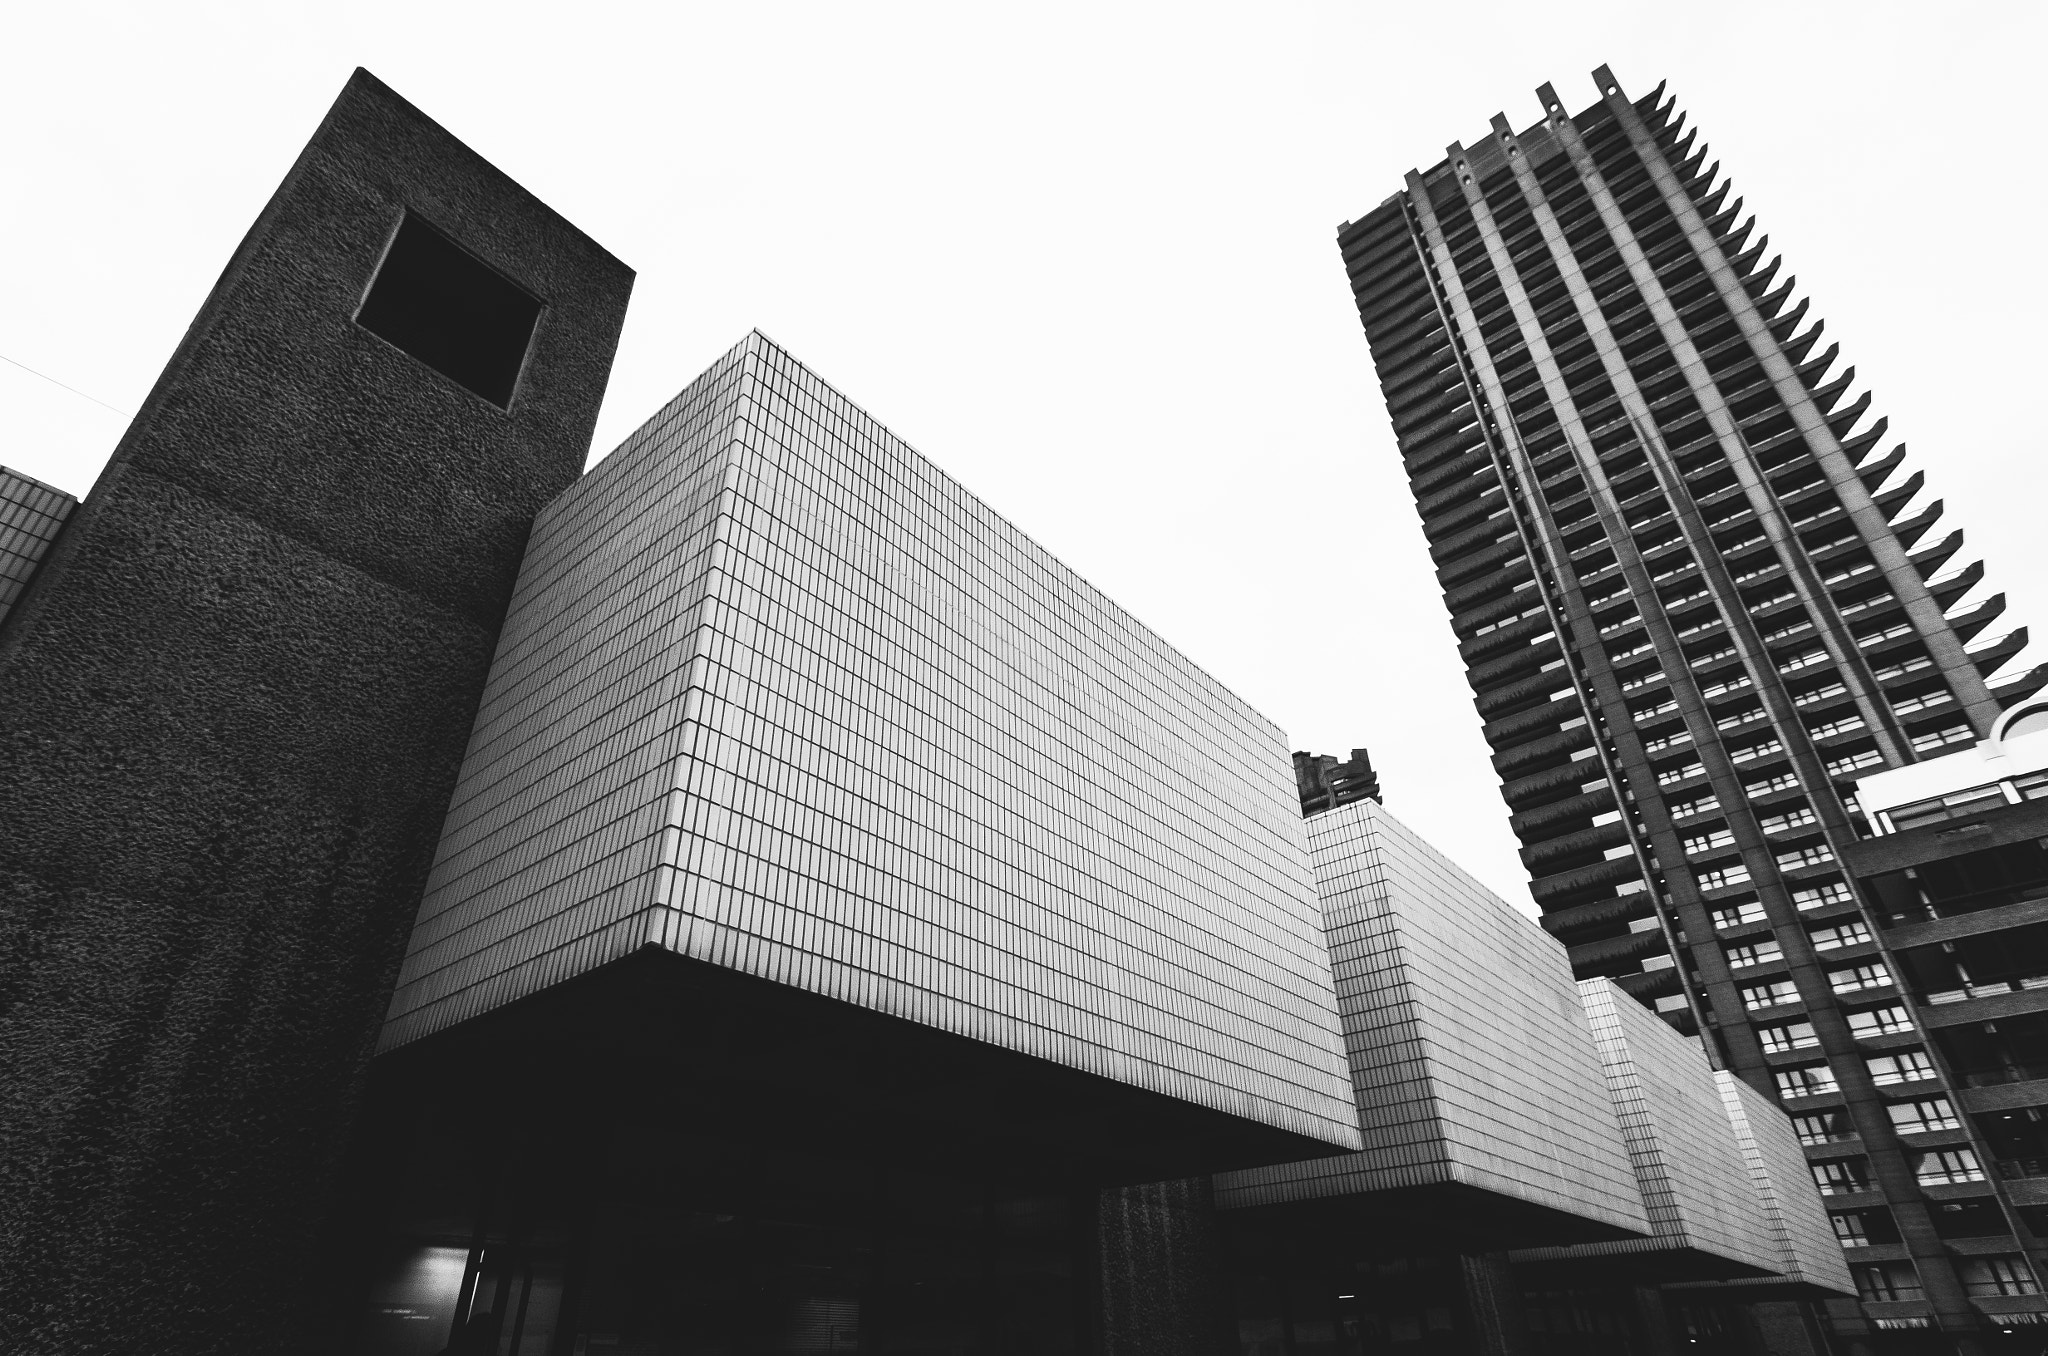 Pentax K-5 II sample photo. Barbican centre, frobisher crescent photography